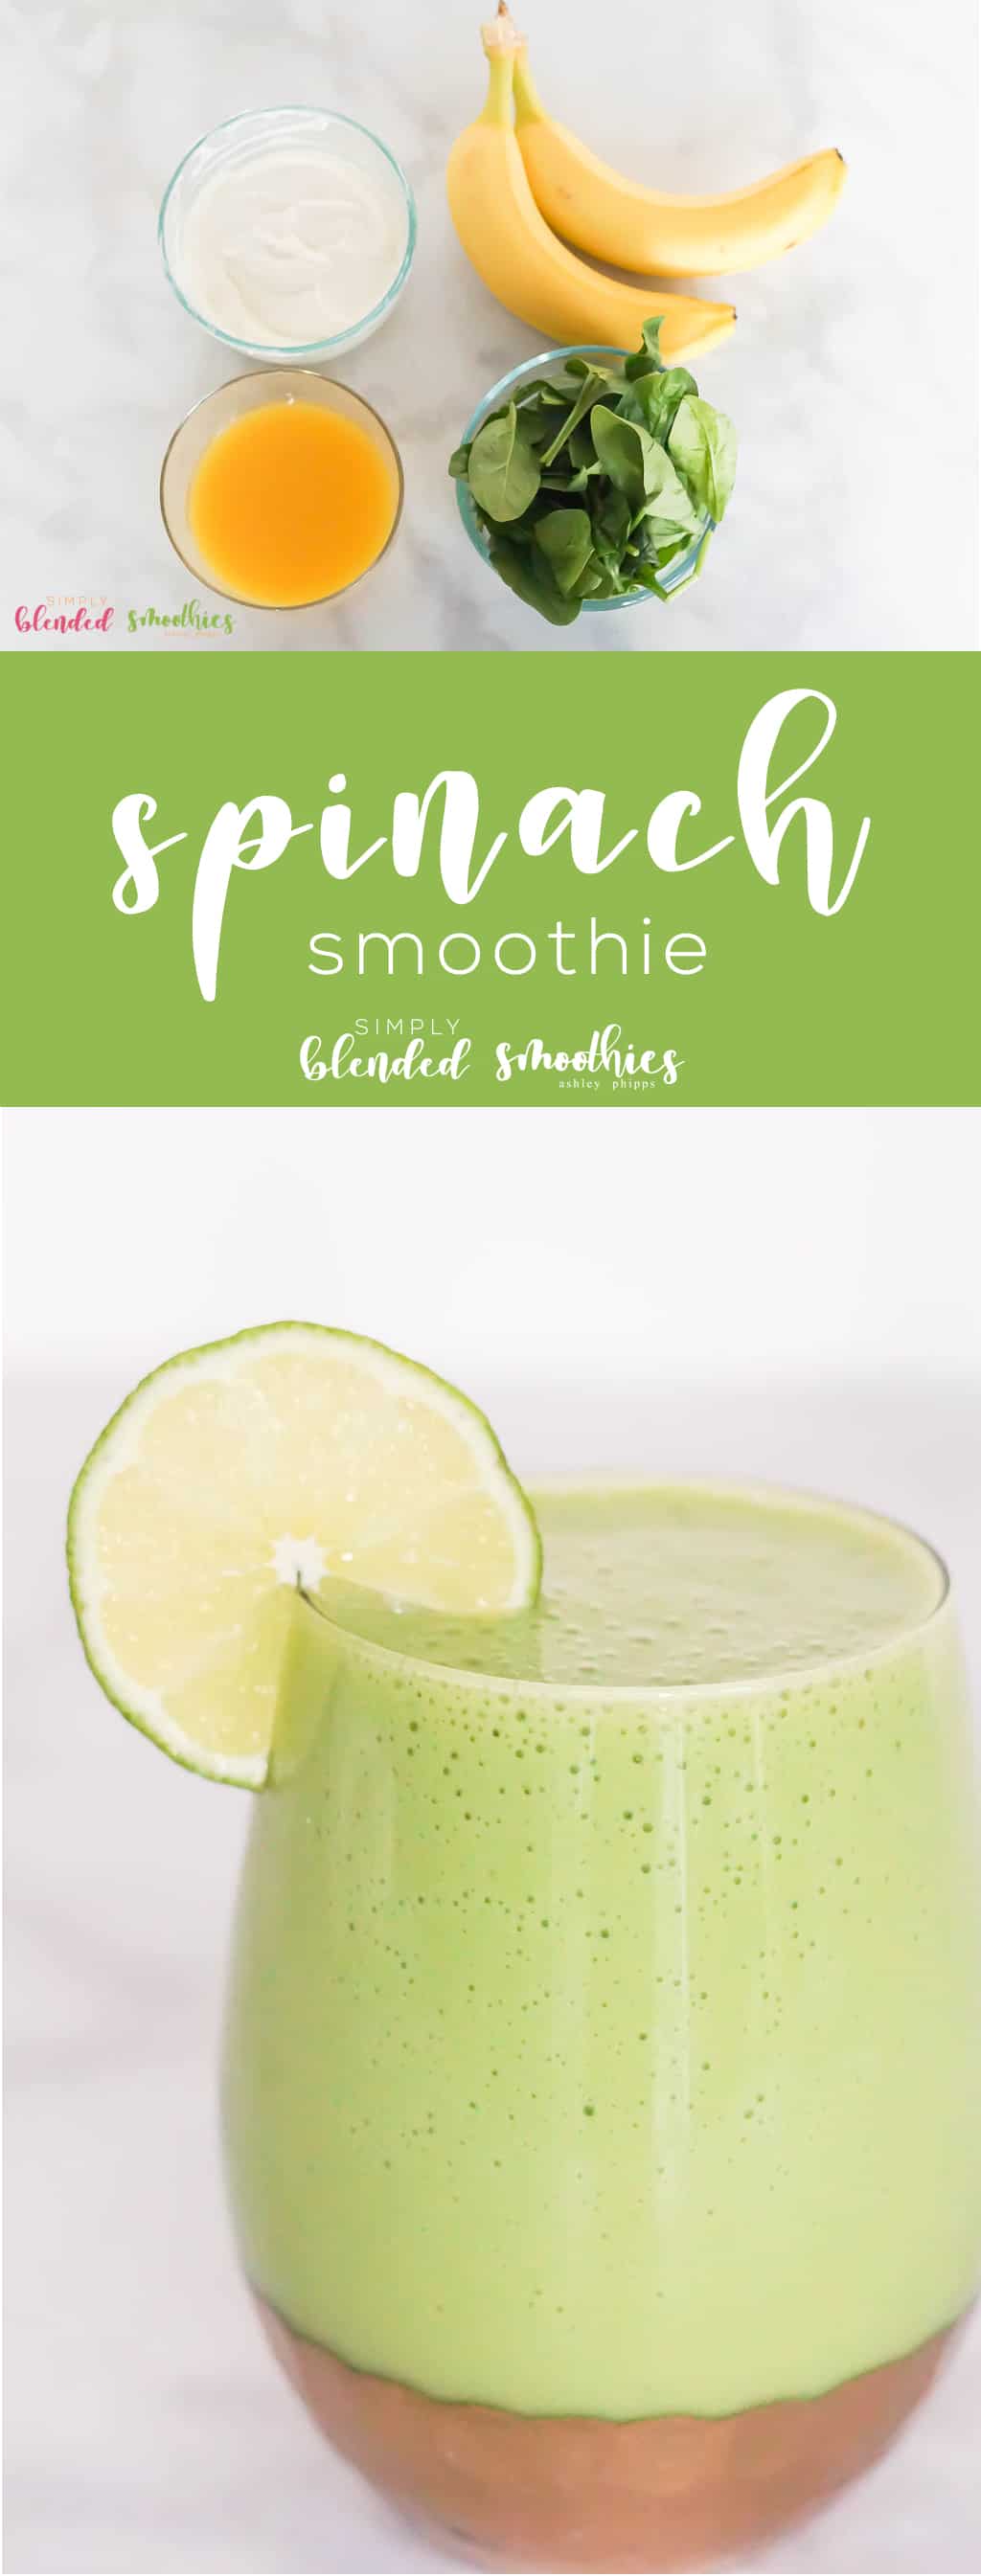 Spinach Smoothie - A Delicious Spinach Smoothie Recipe That Does Not Taste Like Spinach - Spinach Smoothie That Tastes Delicious - Easy Spinach Smoothie Recipe